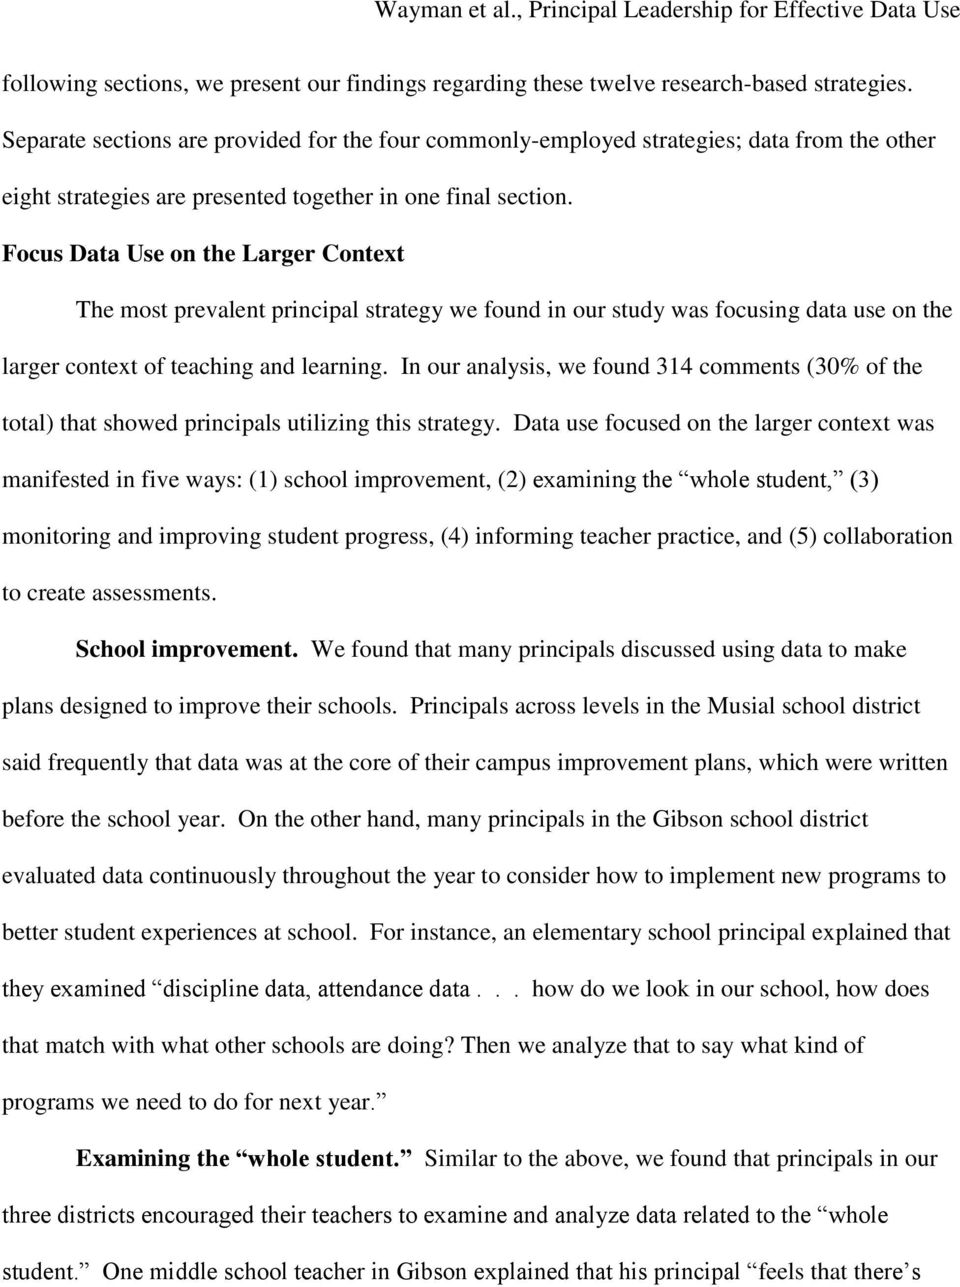 Focus Data Use on the Larger Context The most prevalent principal strategy we found in our study was focusing data use on the larger context of teaching and learning.